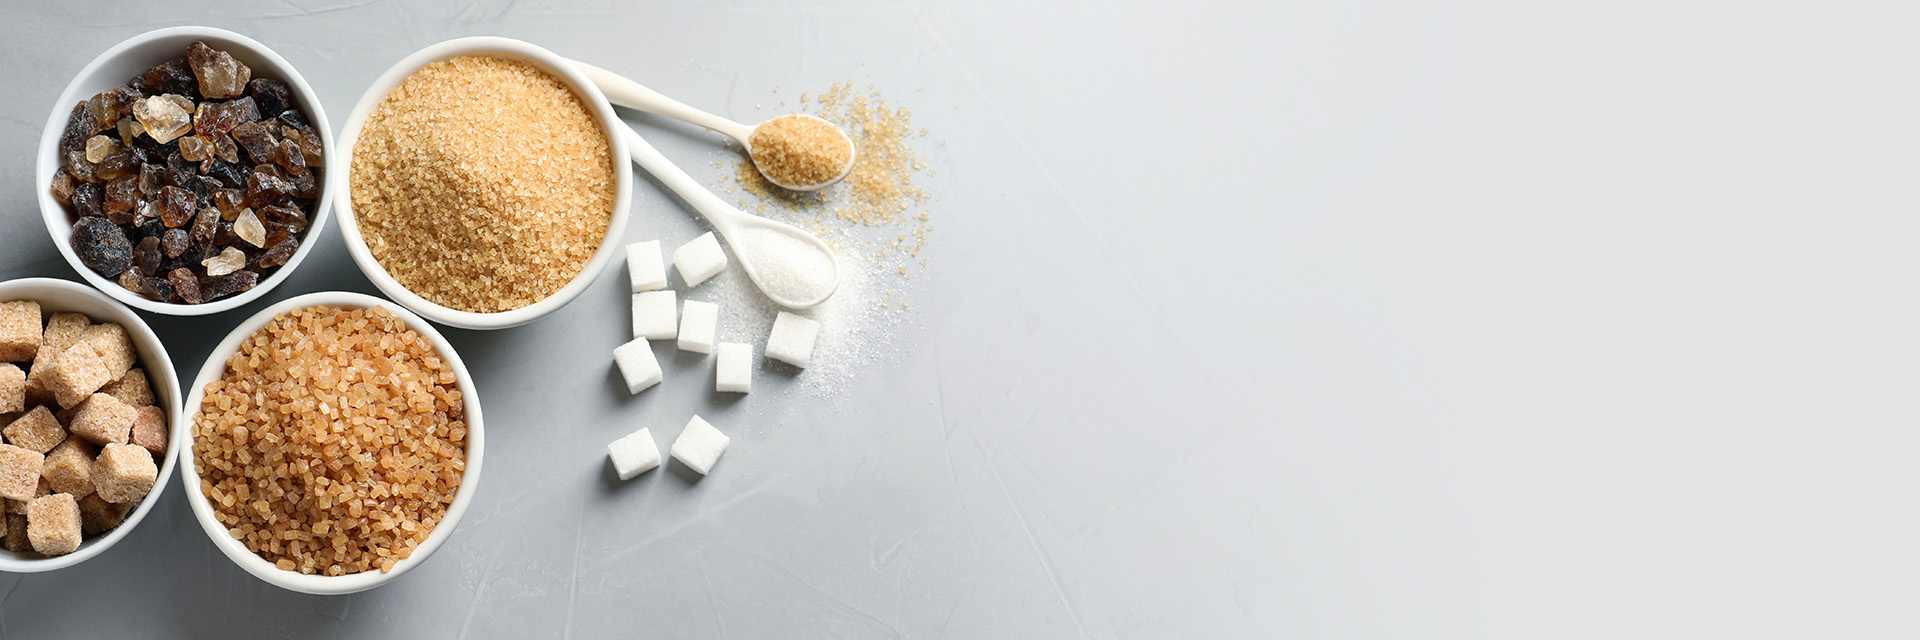 How does sugar affect your skin? We explore the myths